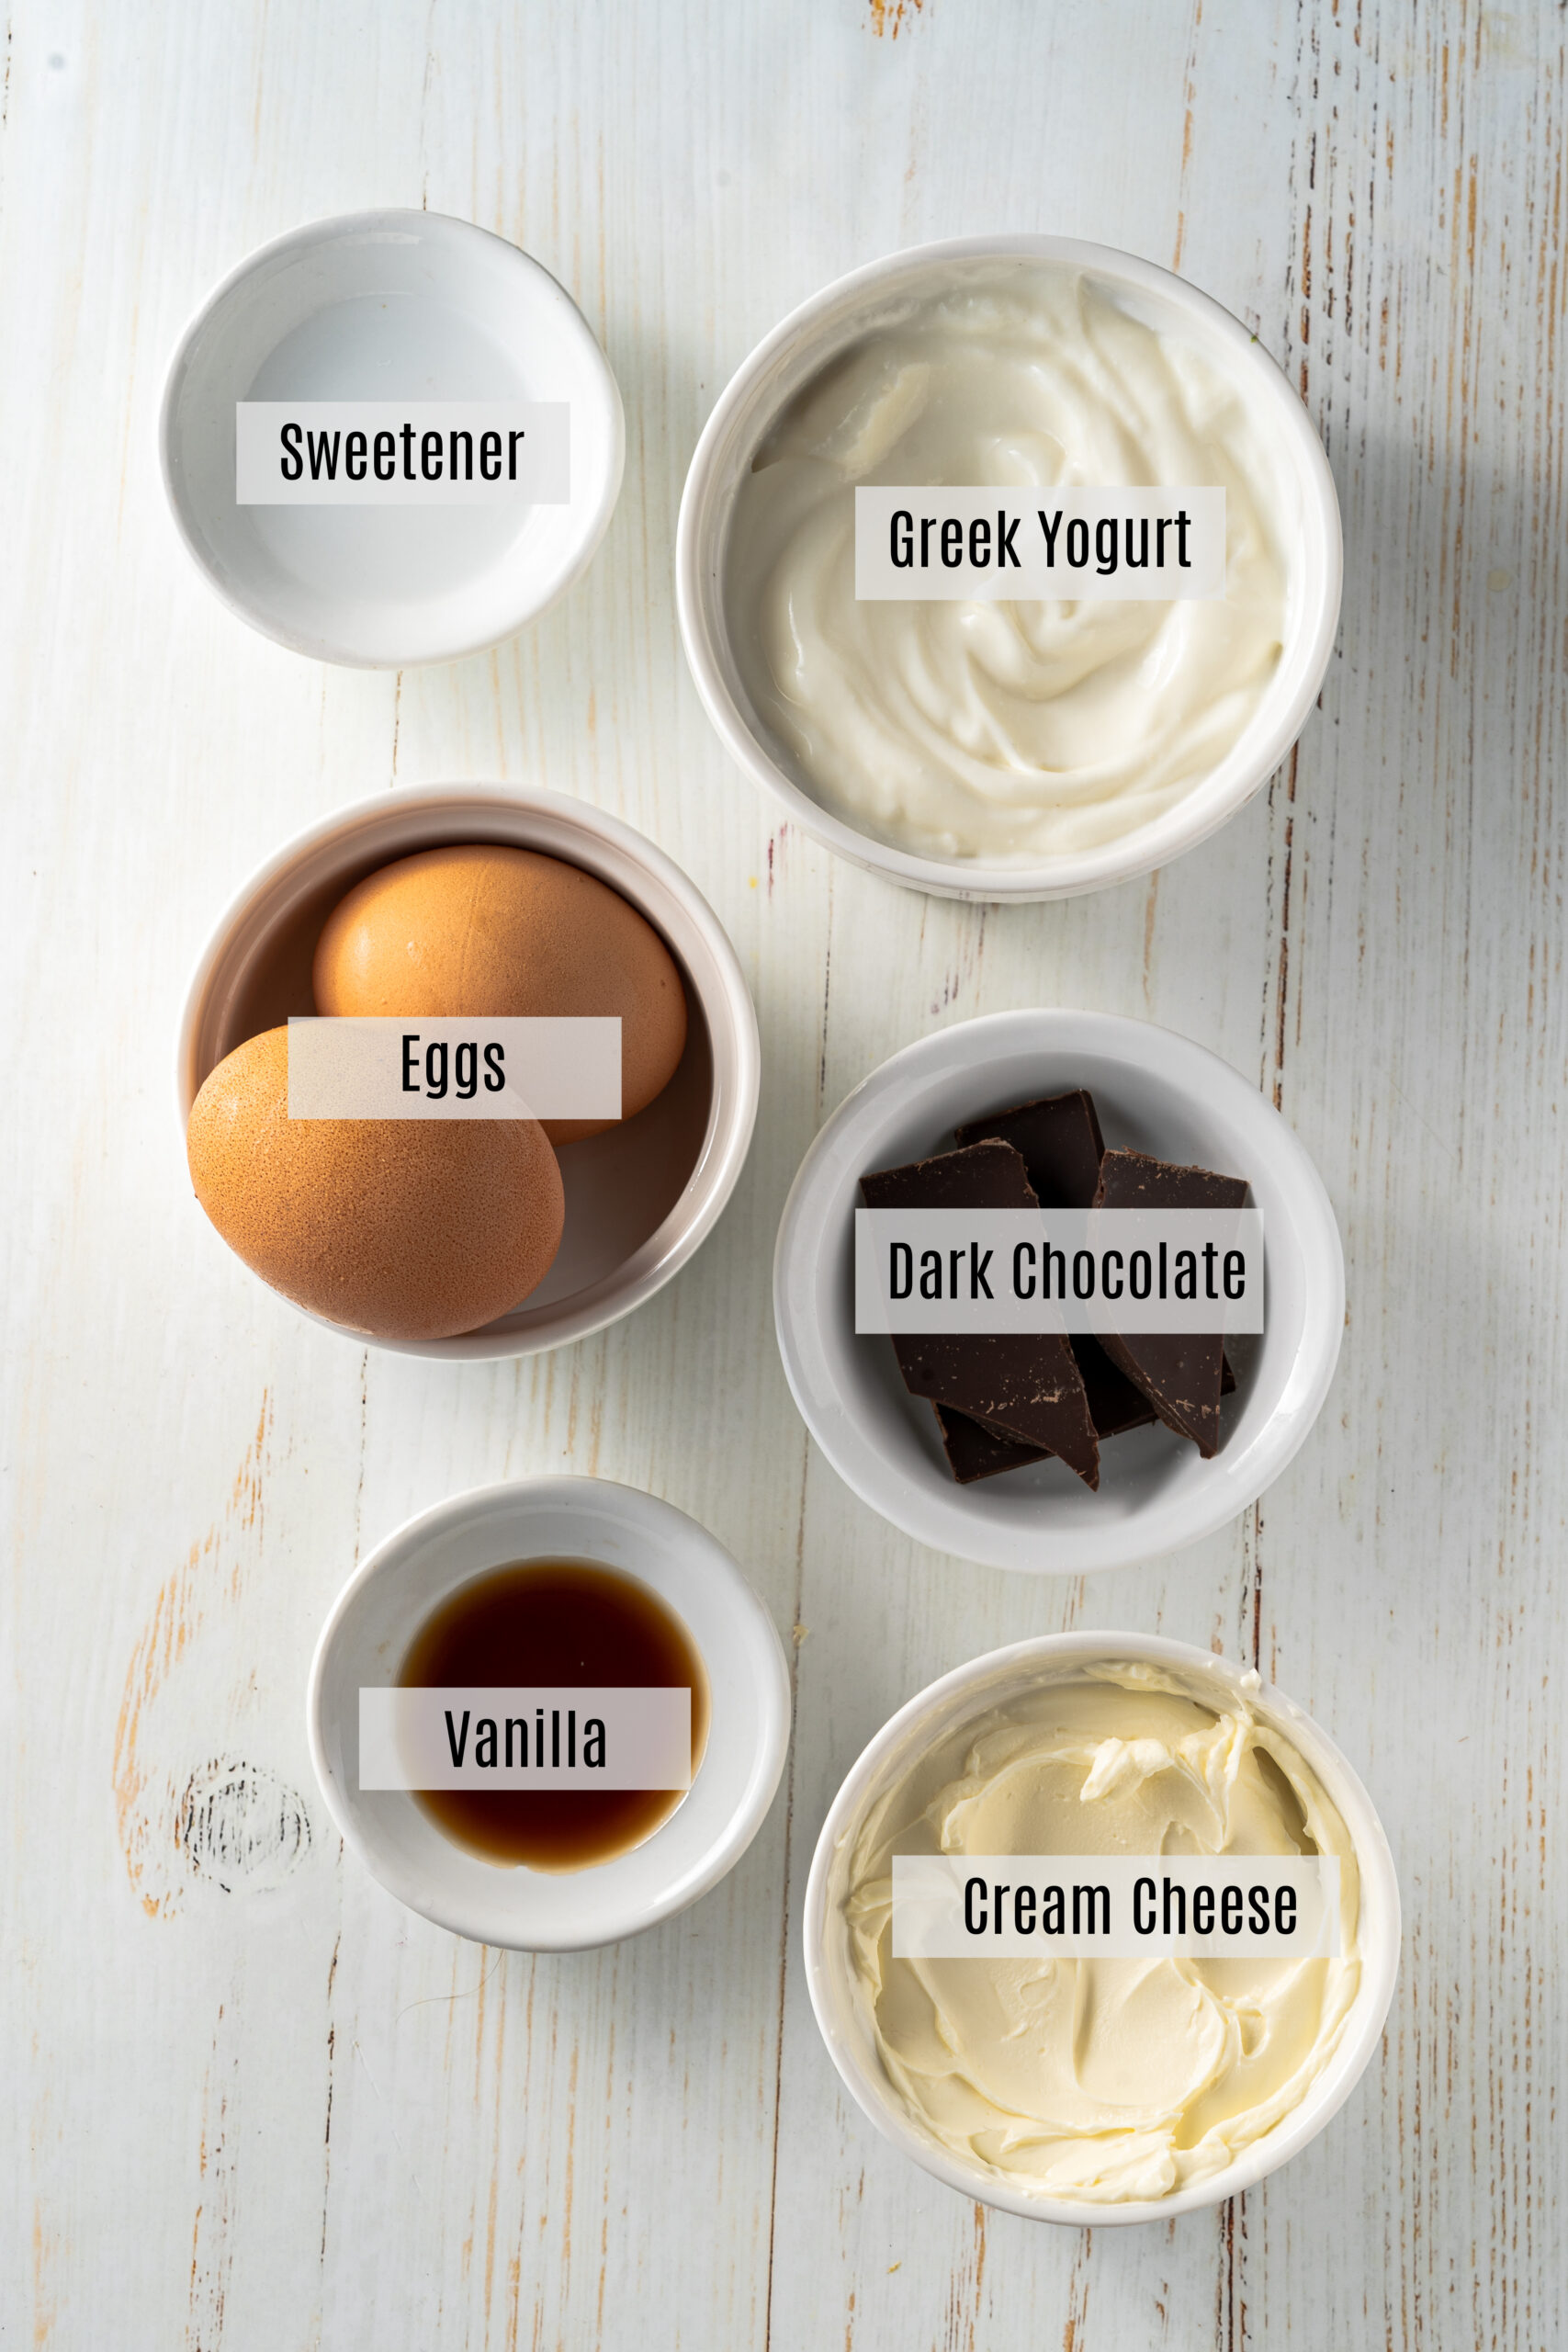 ingredients to make a low carb keto friendly chocolate mousse for dessert